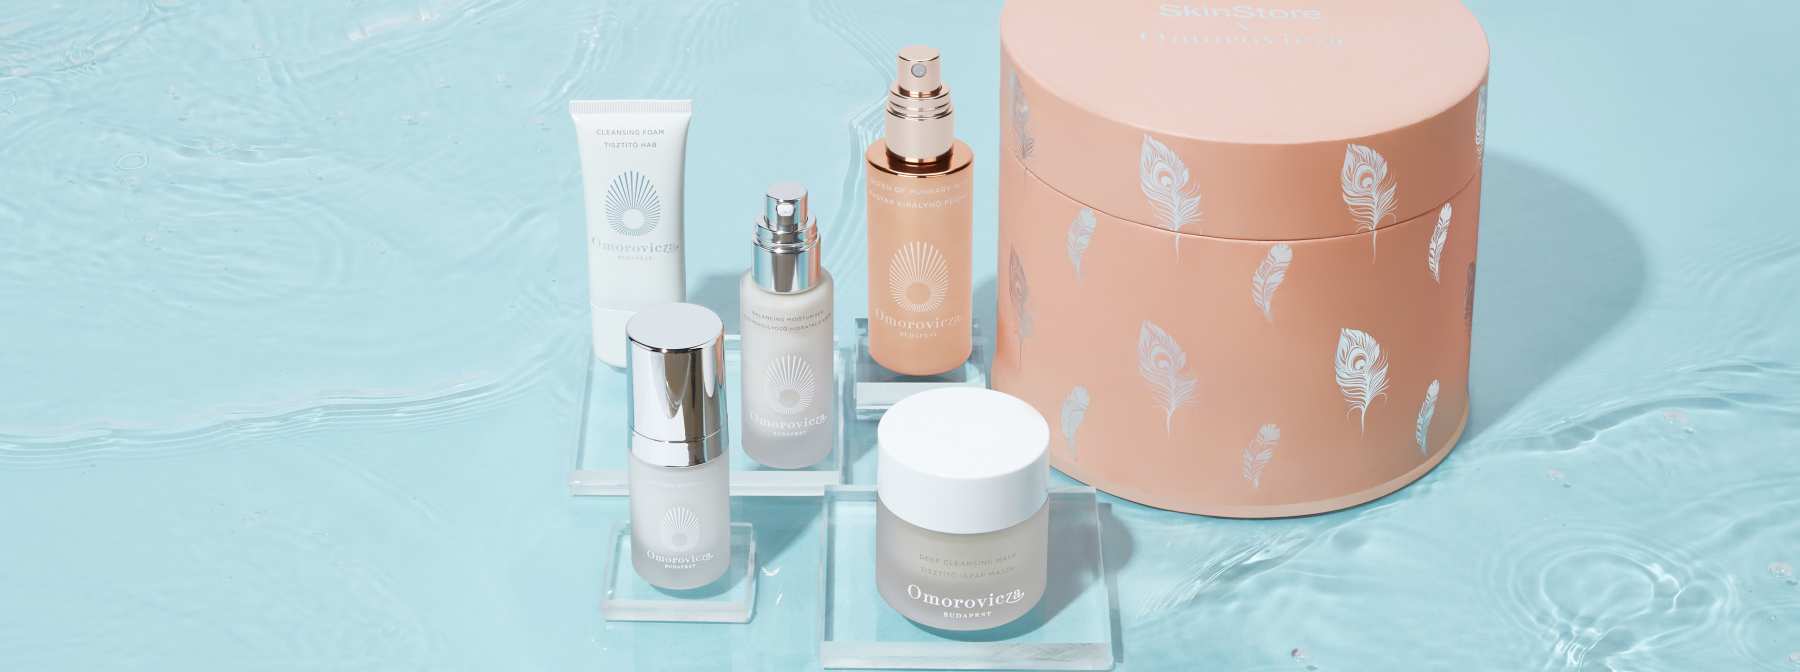 Coming Soon: The SkinStore X Omorovicza Limited Edition Beauty Box